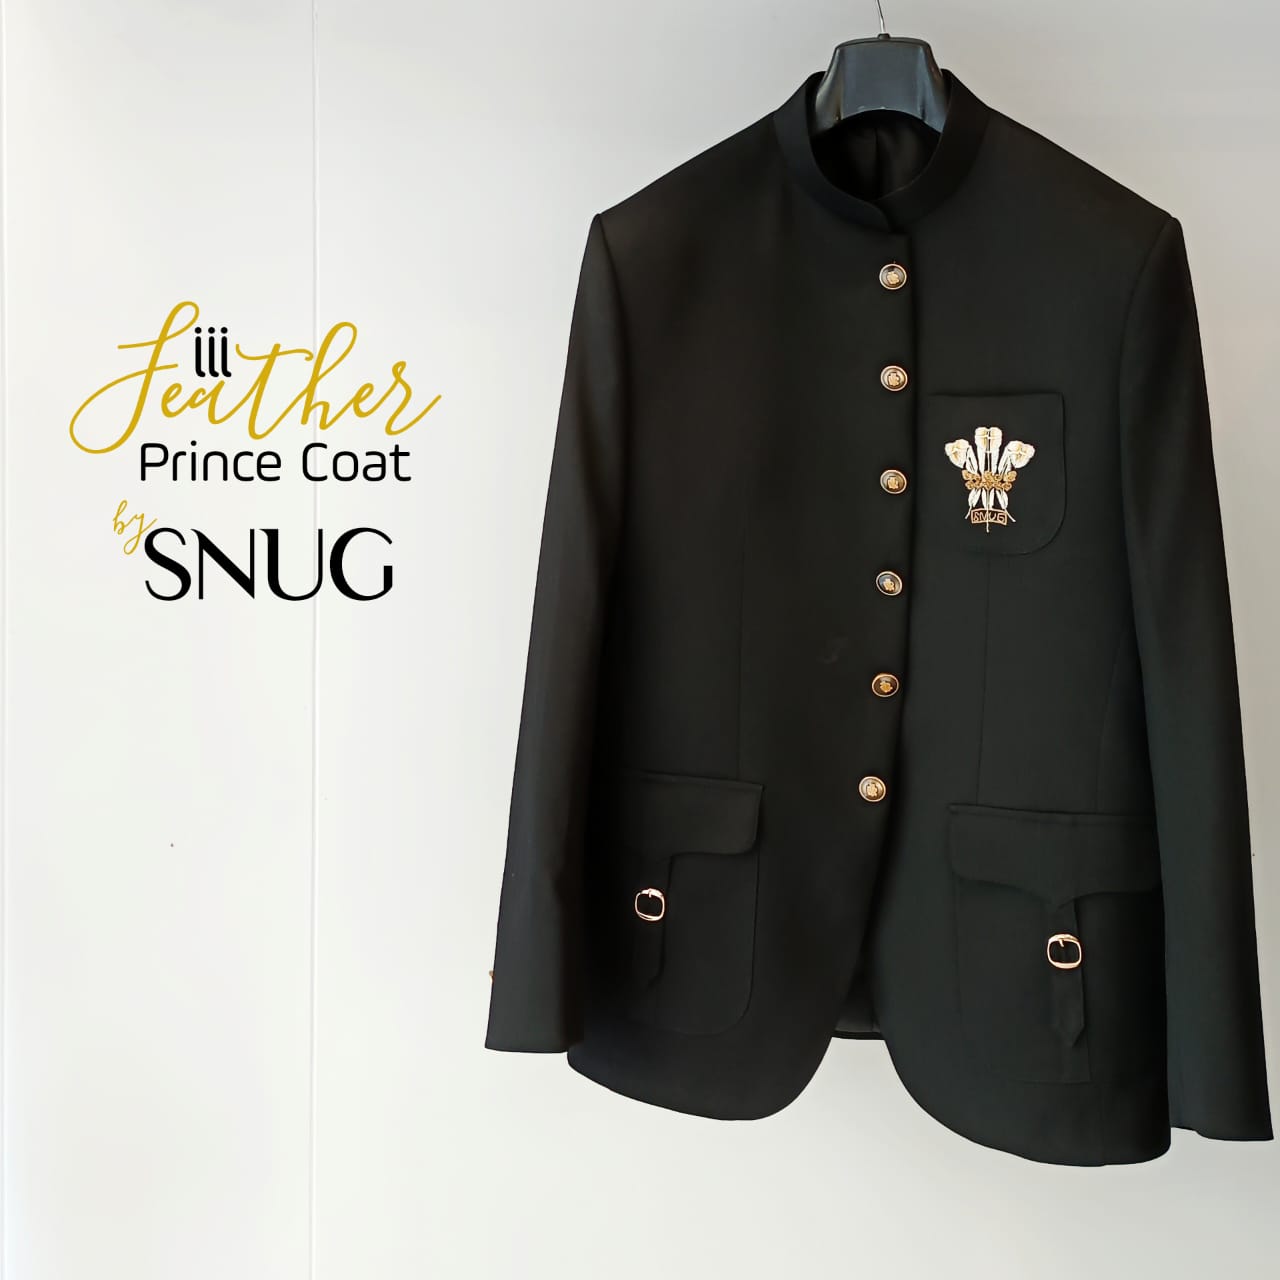 3 Feather Prince Coat